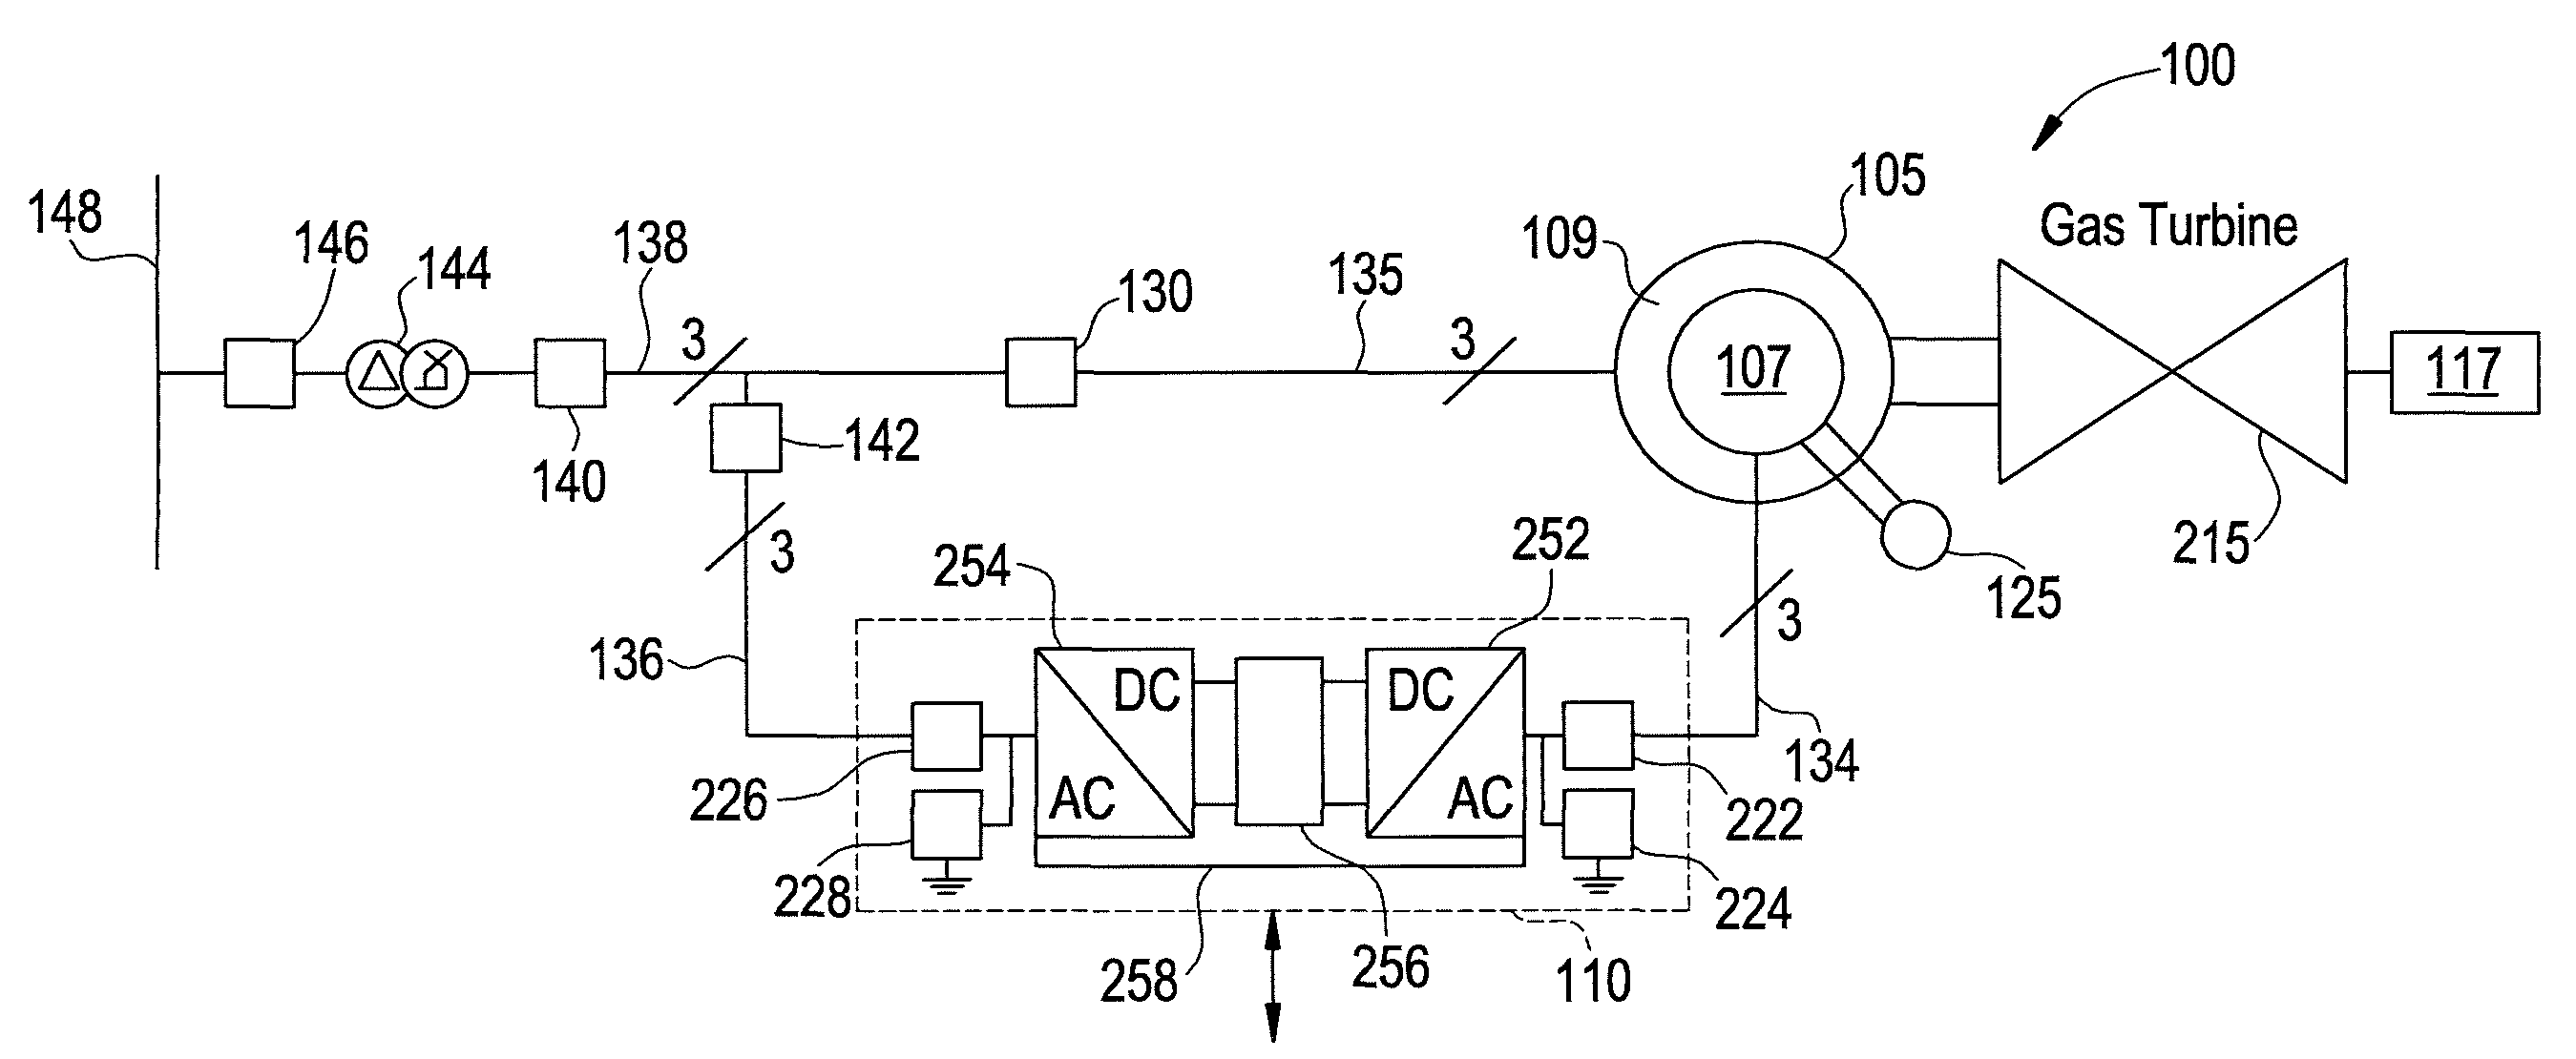 System and method for fixed frequency power generation